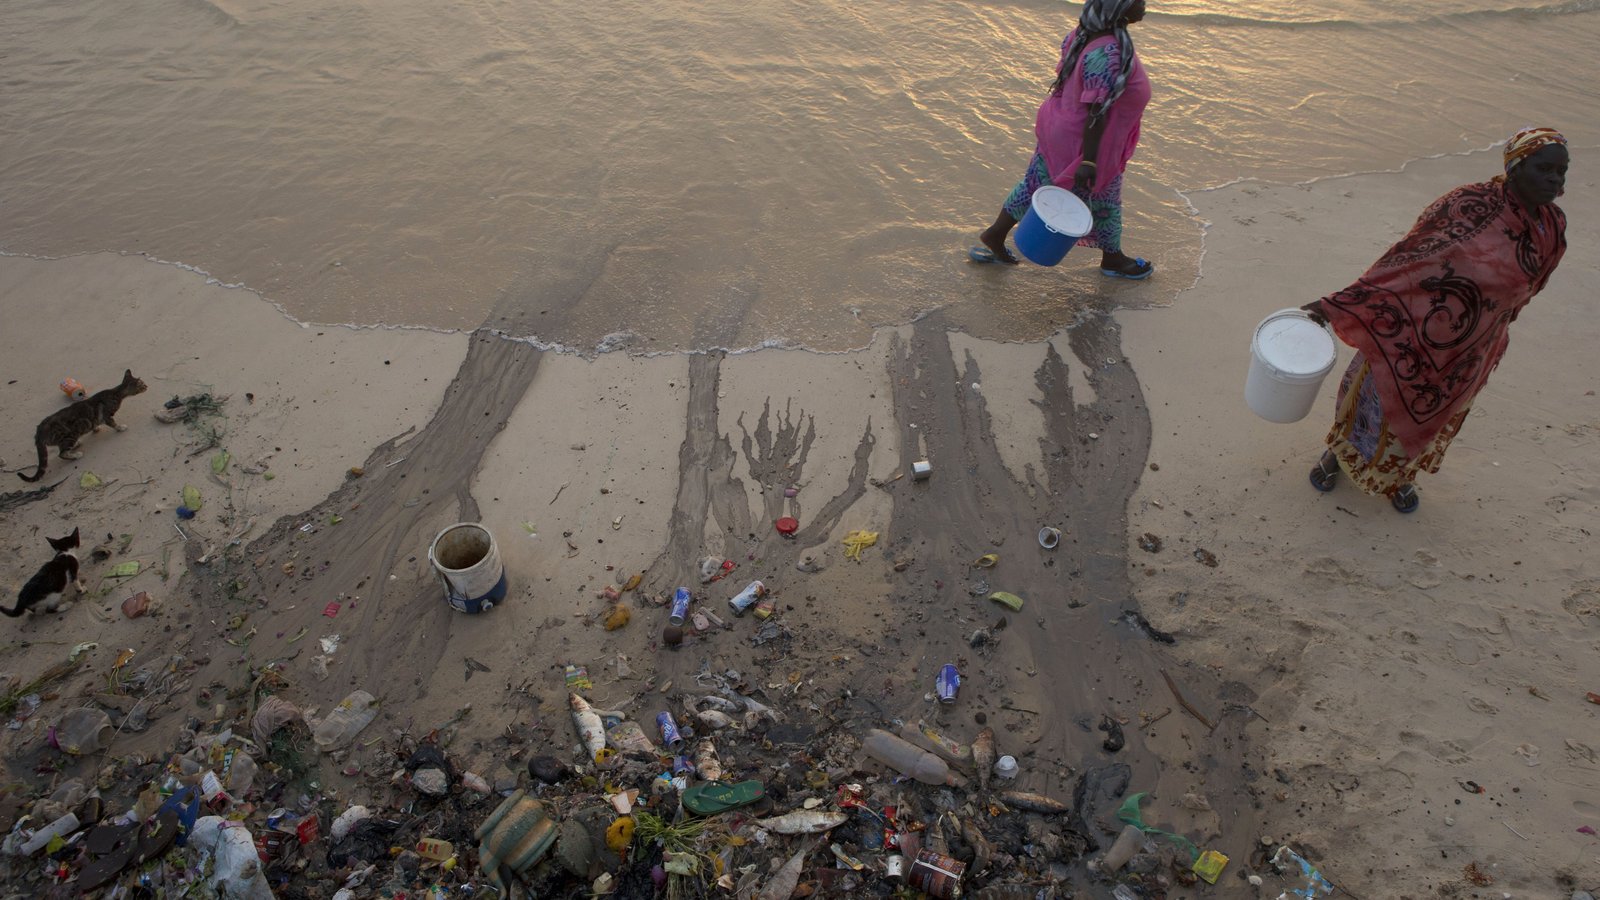 Woman walk past an area where local residents dump their household trash to be carried out by the tide, along the Atlantic Ocean in Saint-Louis, Senegal, Sunday, May 19, 2013. | AP Photo/Rebecca Blackwell